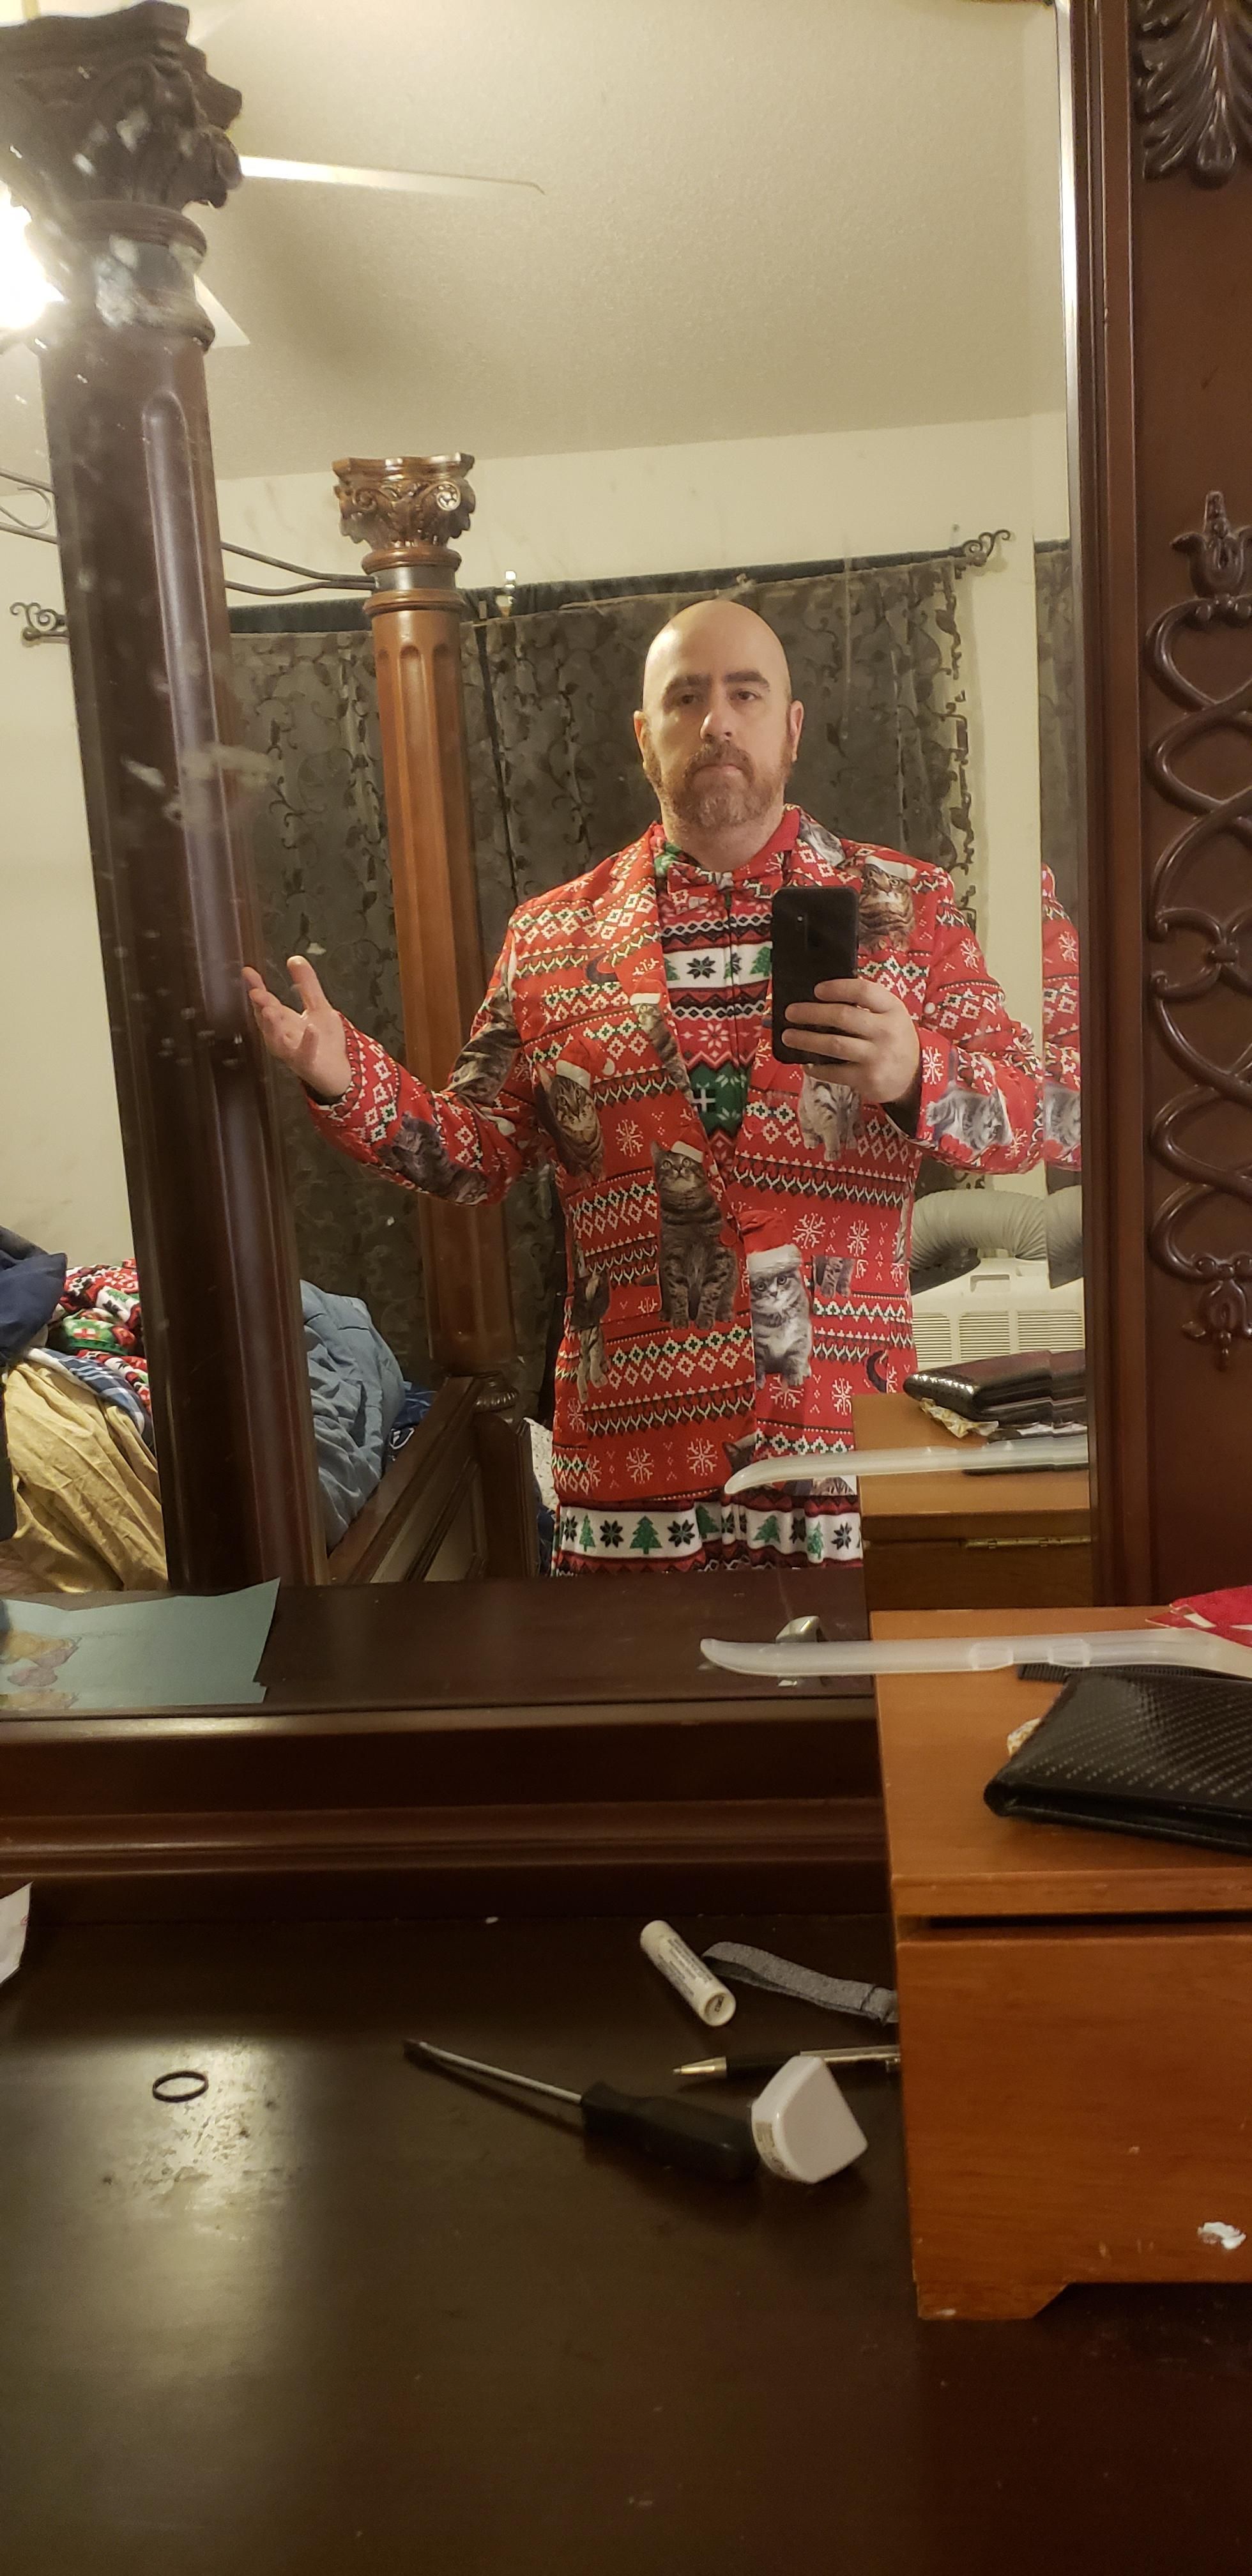 My wife told me to get dressed up for professional Xmas photos... Think I nailed it.